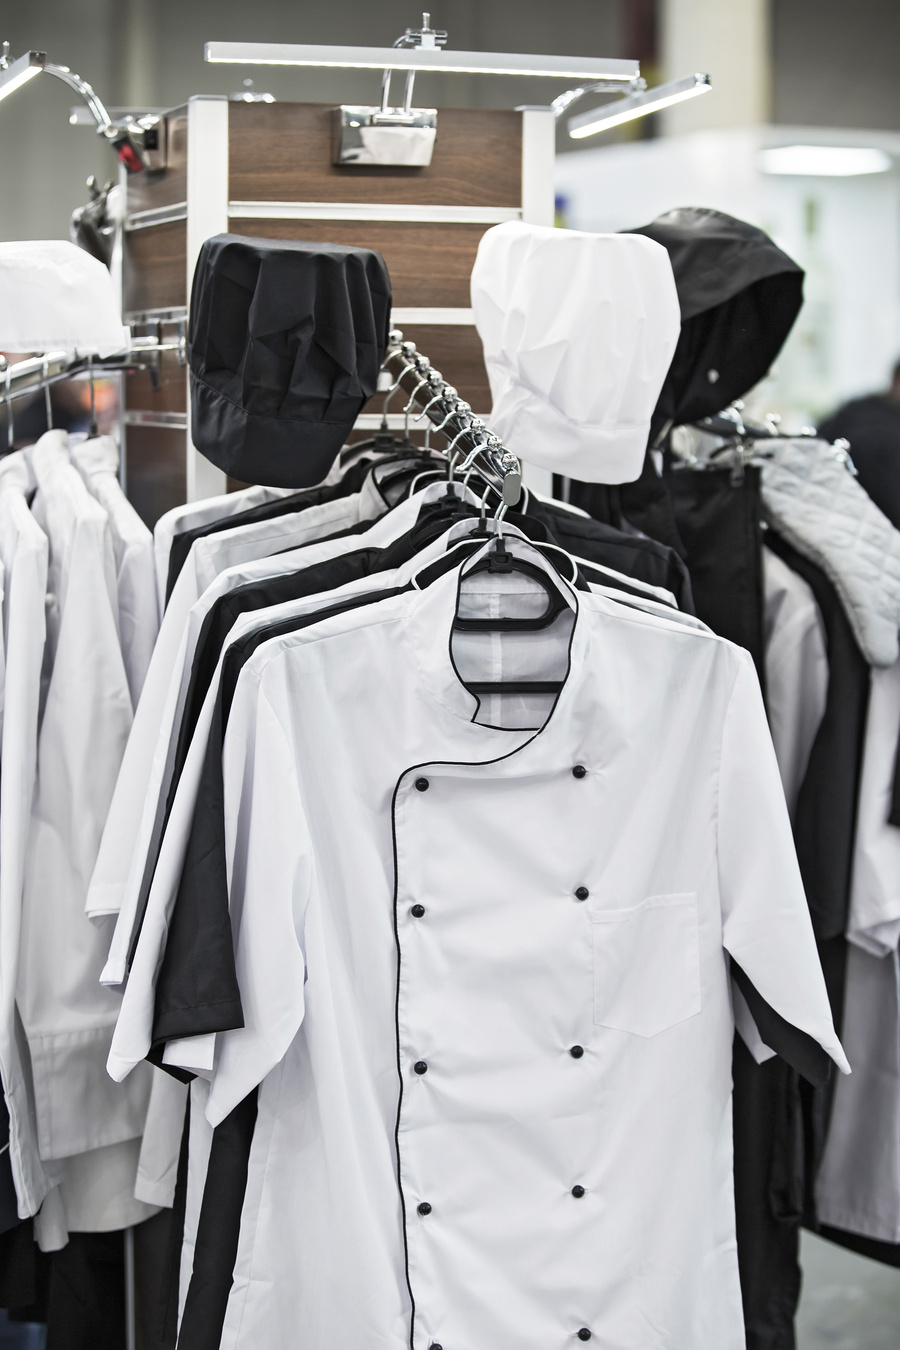 Cook uniform in a restaurant on a hanger, white and black uniforms, shirts and hats